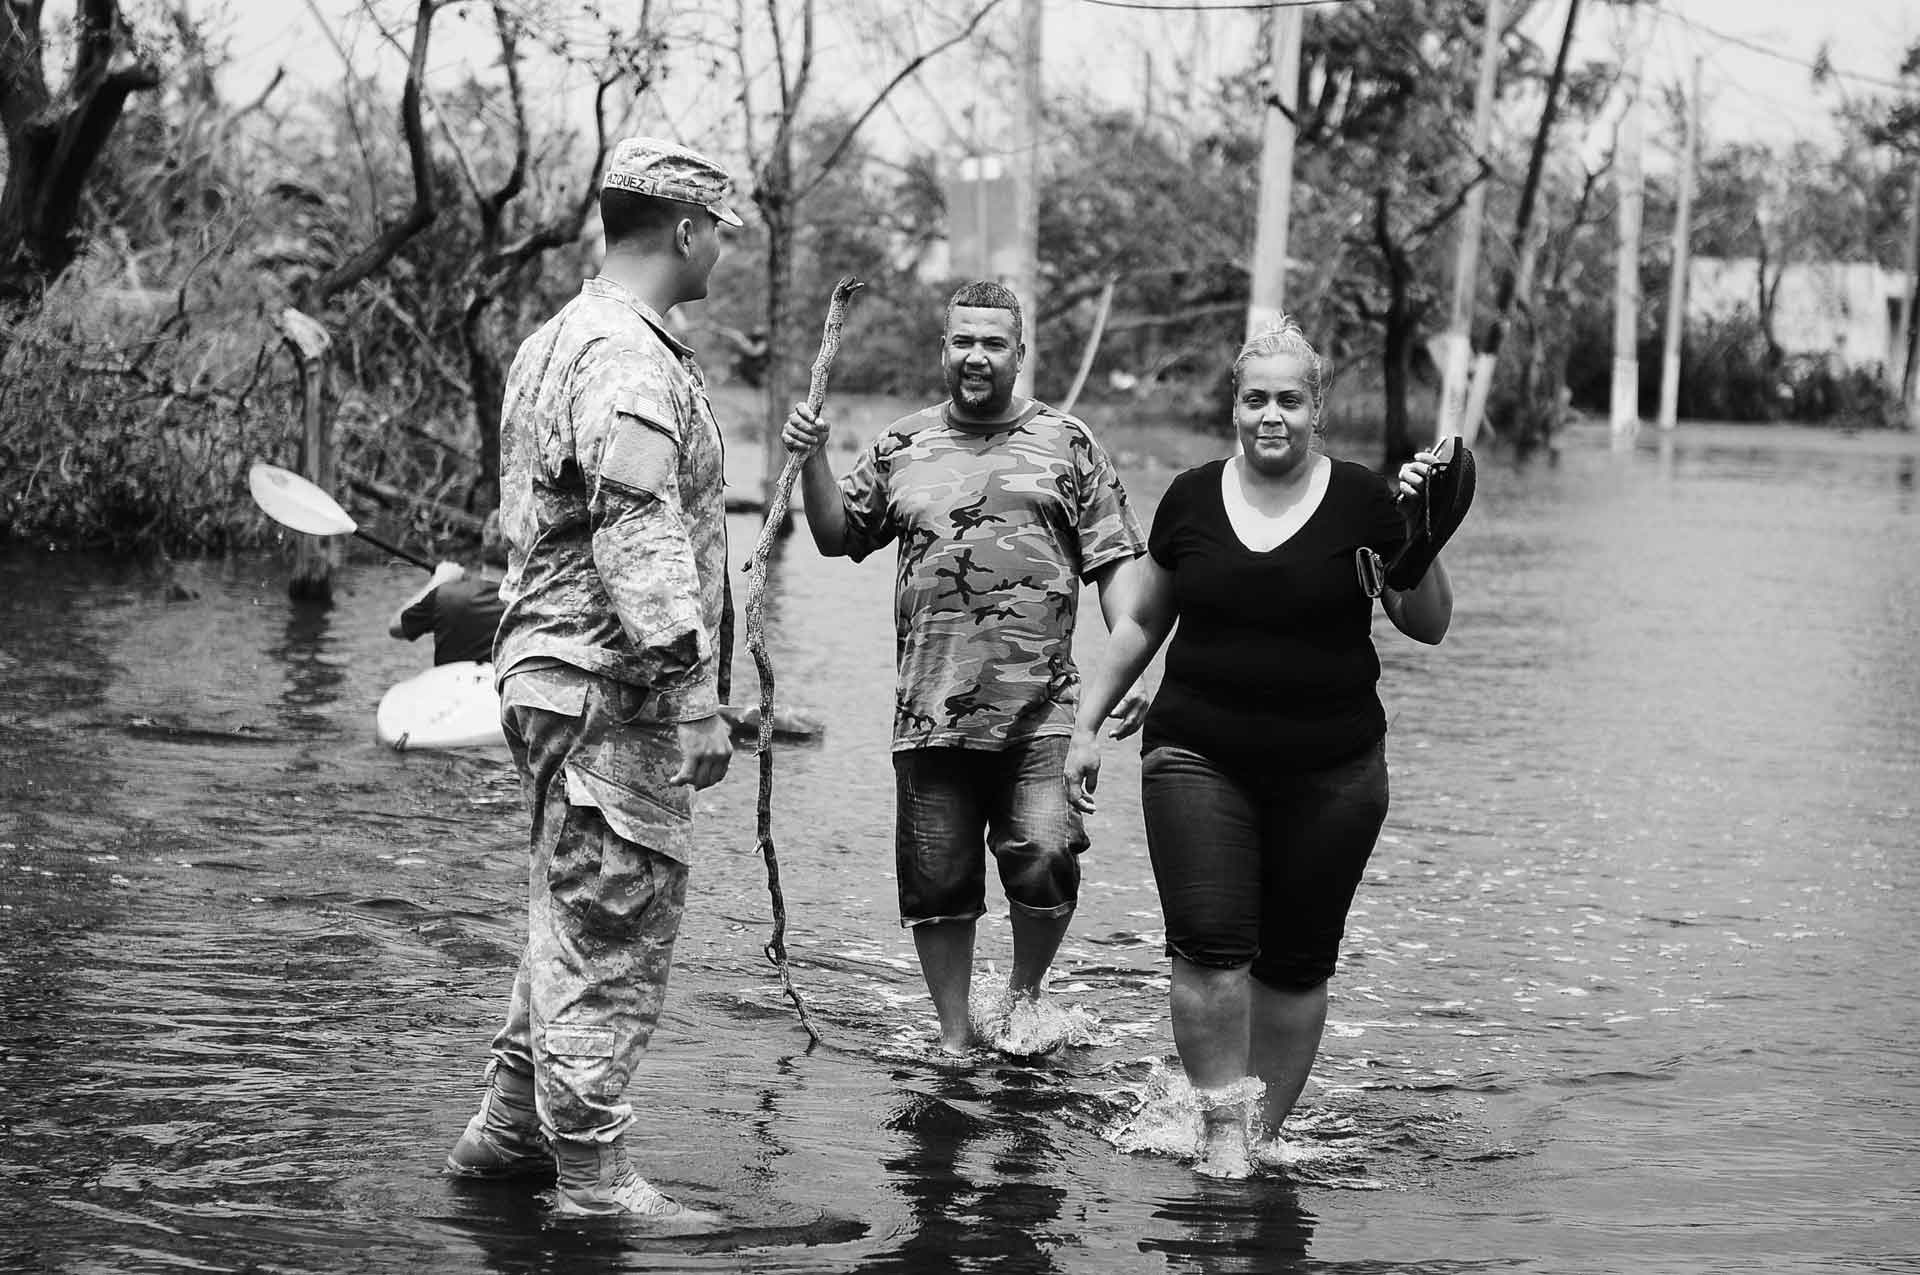 Puerto Rico National Guard Soldier helps a couple getting away from the flooded areas in Condado, San Juan, Puerto Rico after the path of Hurricane Maria. Photo by Sgt. Jose Ahiram Diaz-Ramos/PRNG-PAO